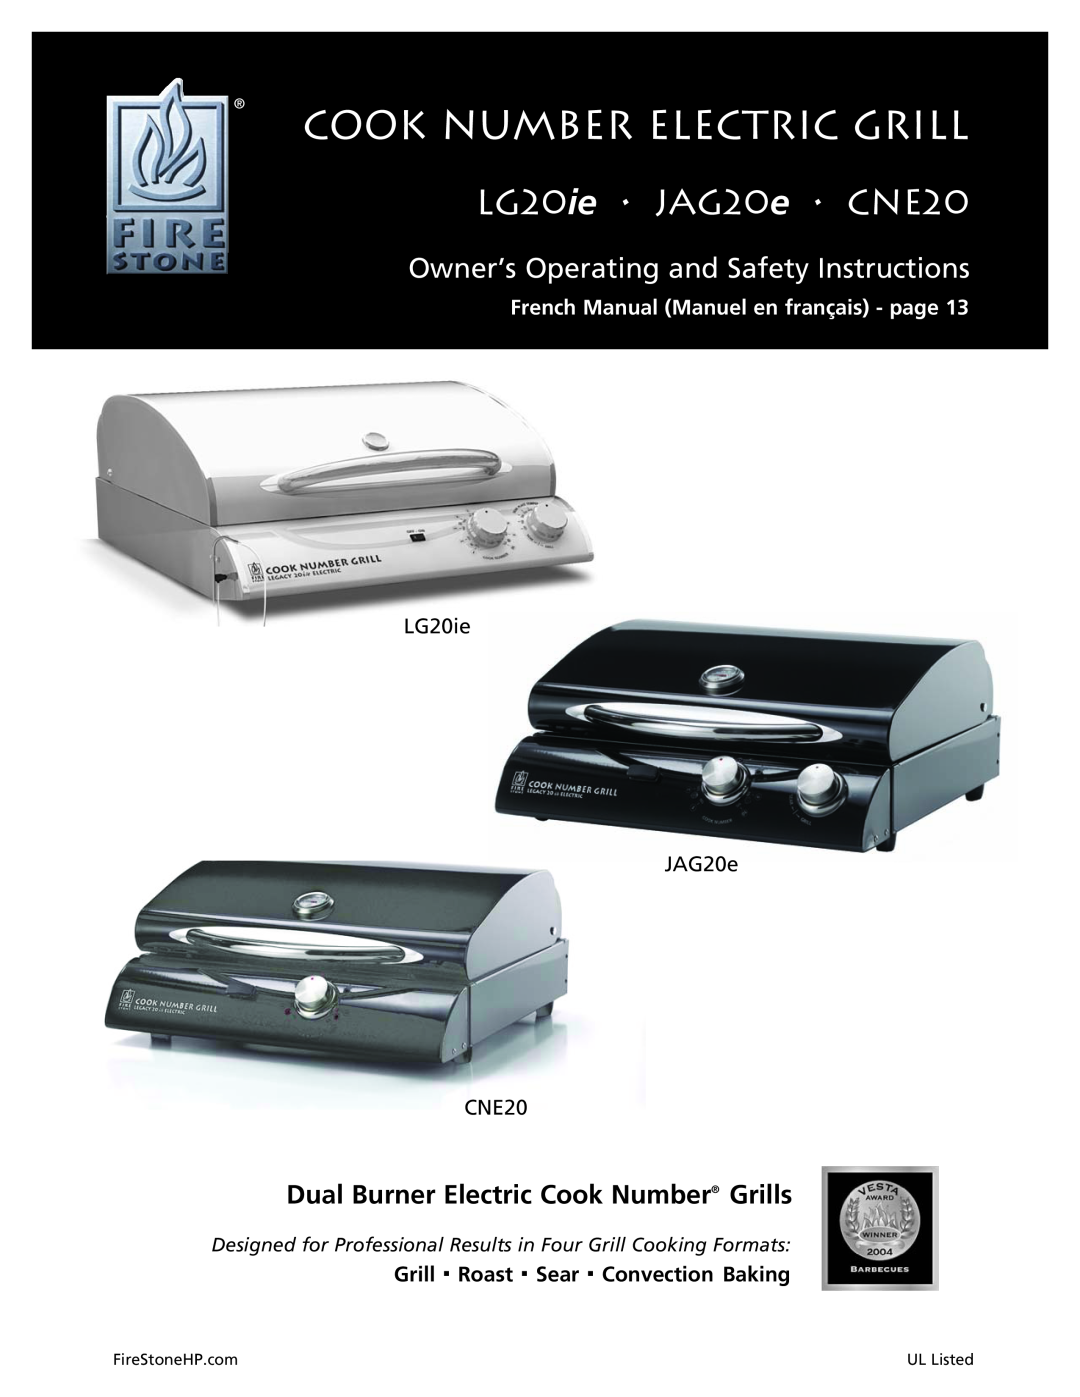 Dual manual Cook Number Electric Grill, LG20ie JAG20e CNE20, Owner’s Operating and Safety Instructions, FireStoneHP.com 